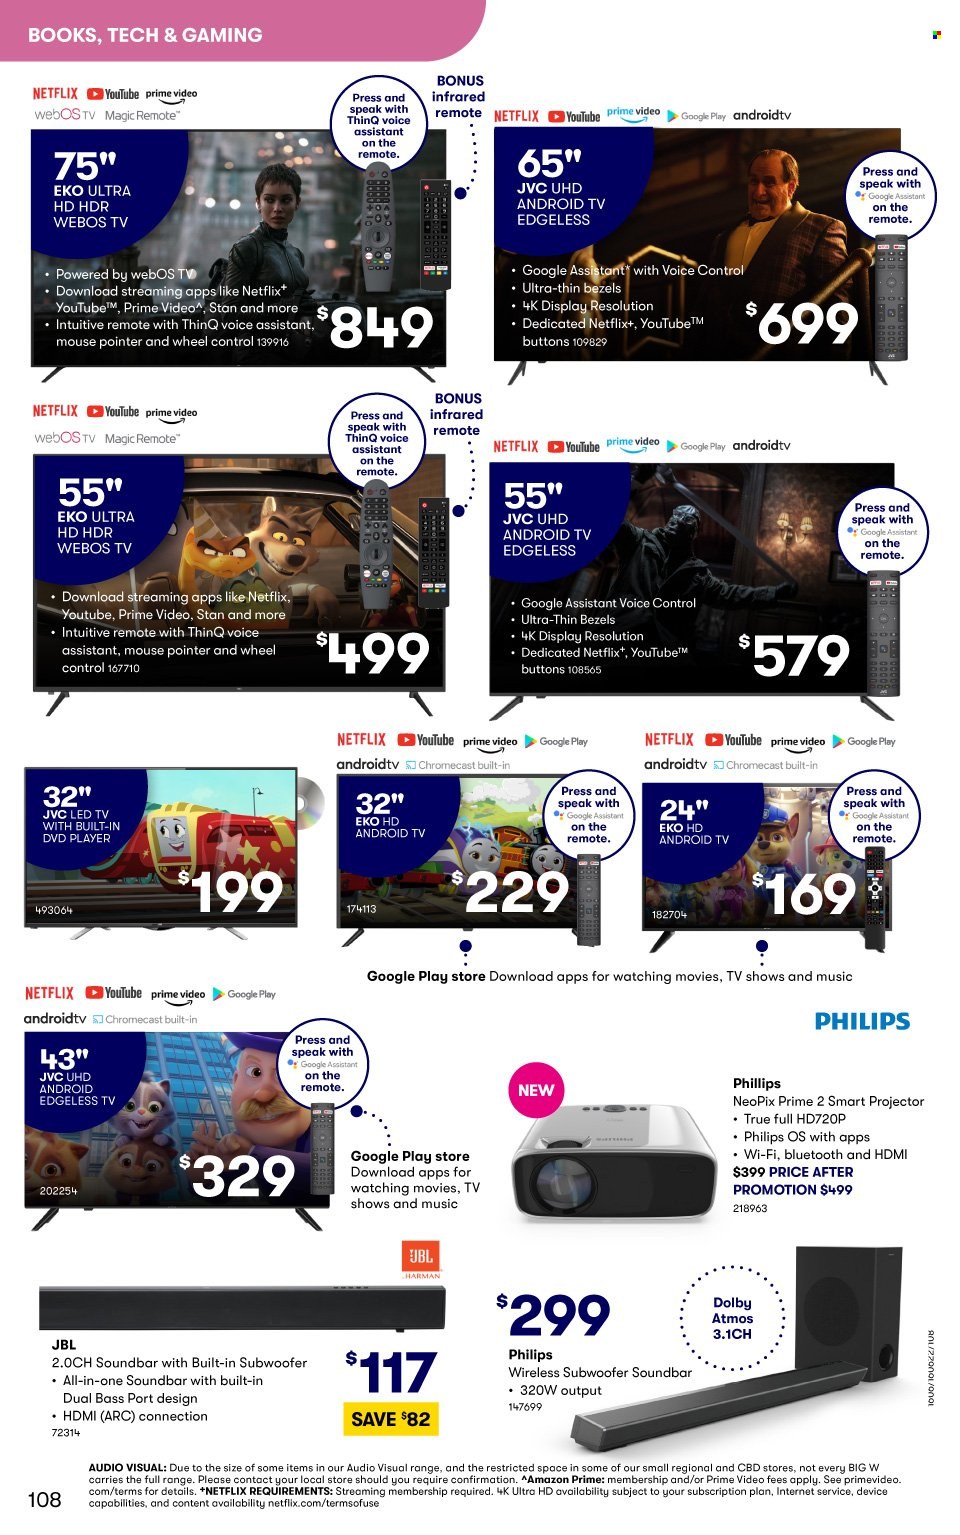 thumbnail - BIG W Catalogue - Sales products - Philips, book, mouse, JVC, Android TV, LED TV, UHD TV, ultra hd, TV, dvd player, projector, subwoofer, wireless subwoofer, JBL, sound bar, Google Chromecast. Page 108.